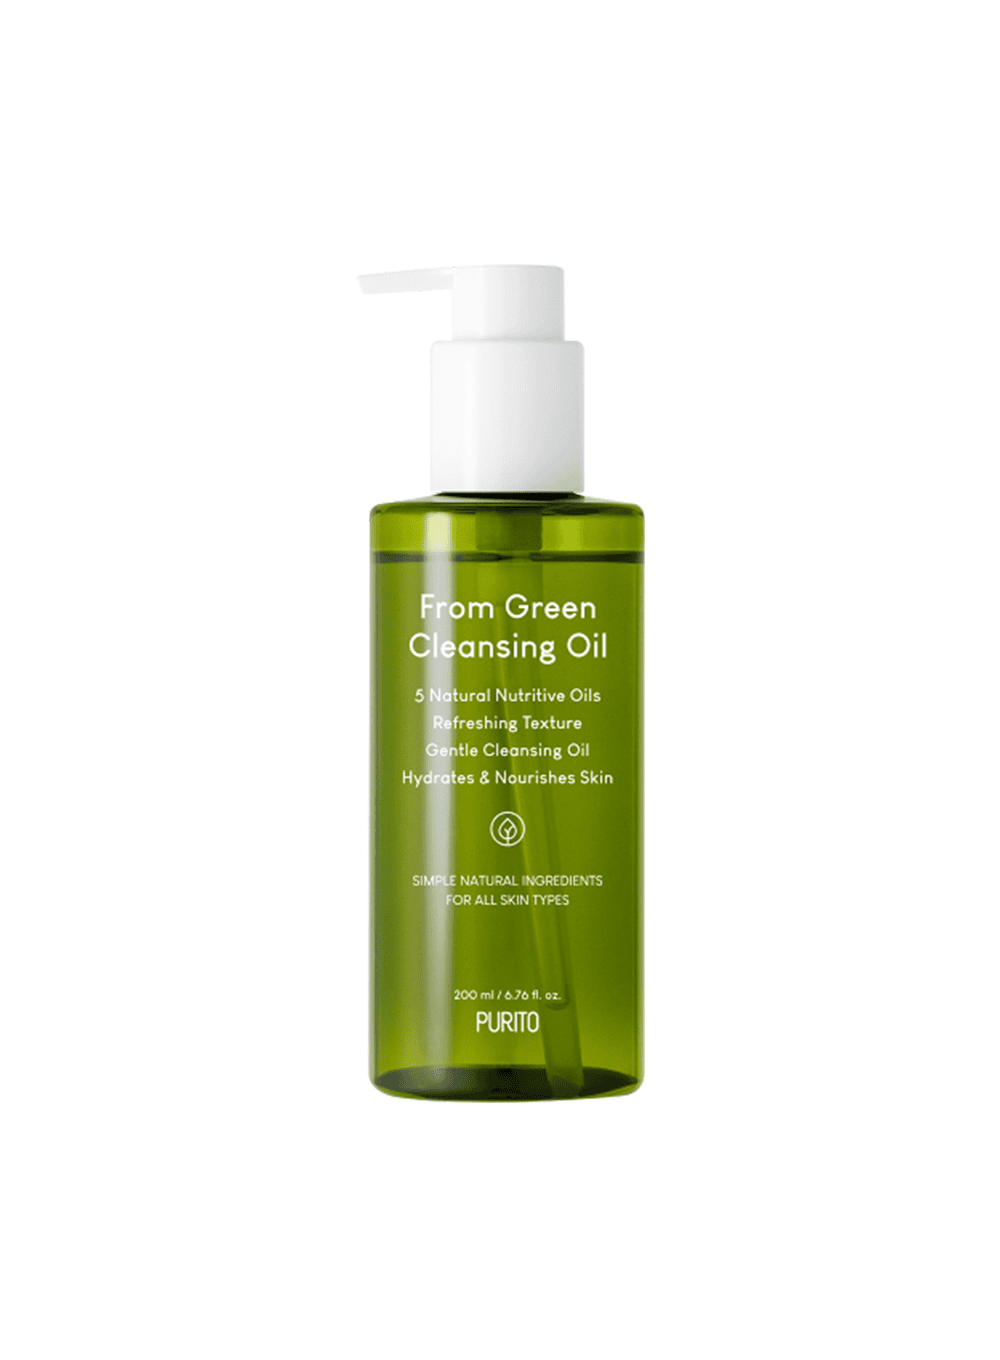 From Green Cleansing Oil (200ml)